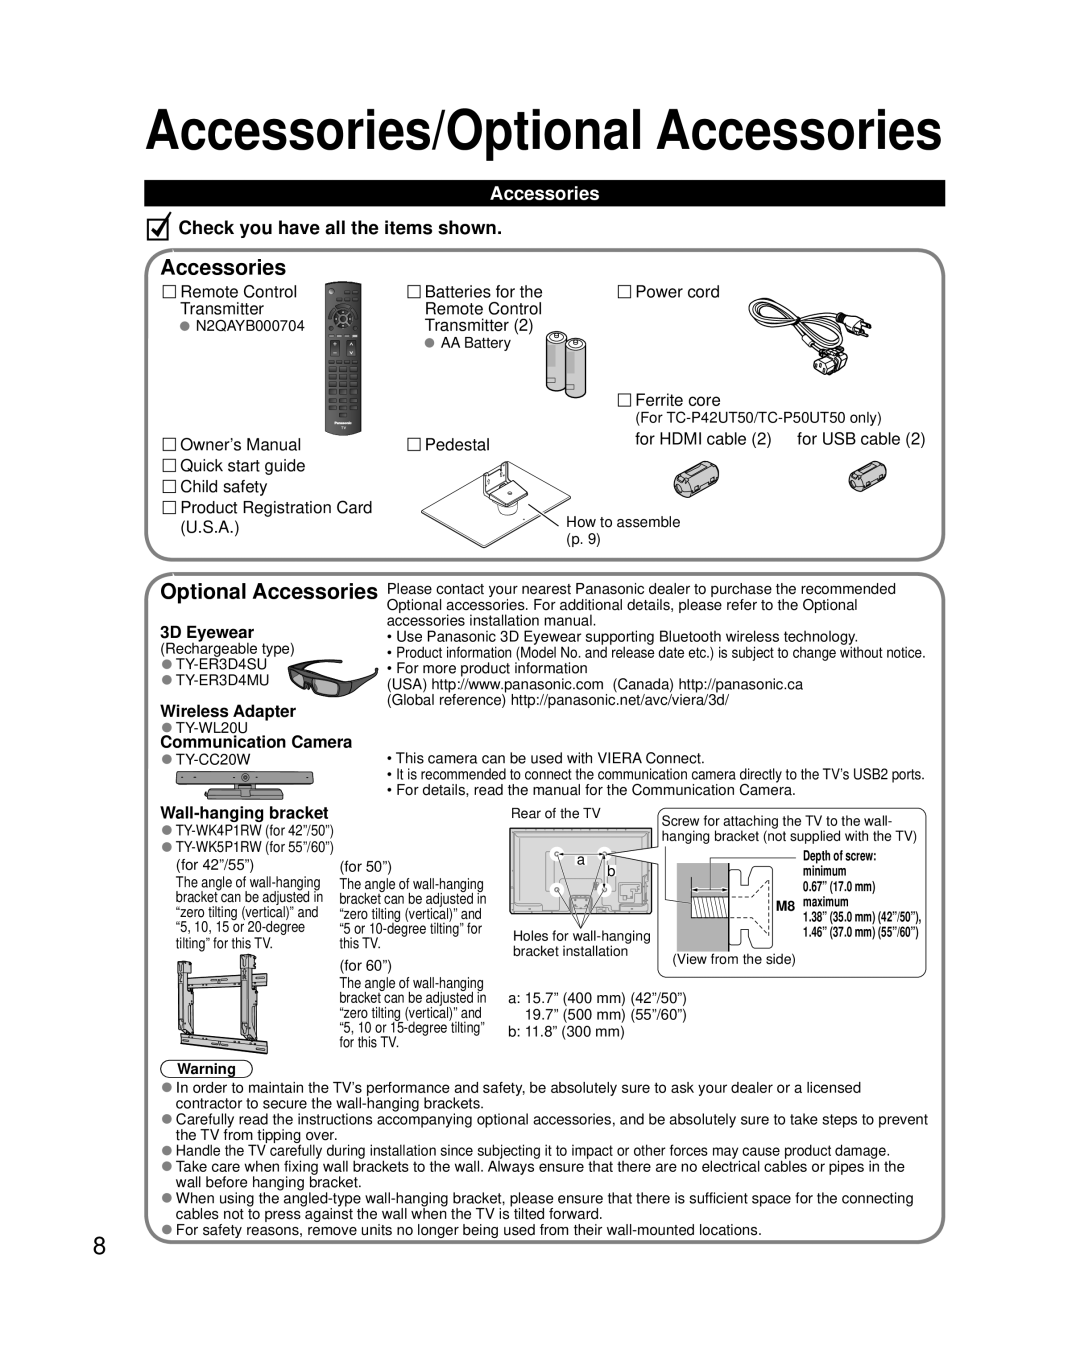 Panasonic TC-P42UT50 Accessories/Optional Accessories, Check you have all the items shown, 3D Eyewear, Wireless Adapter 